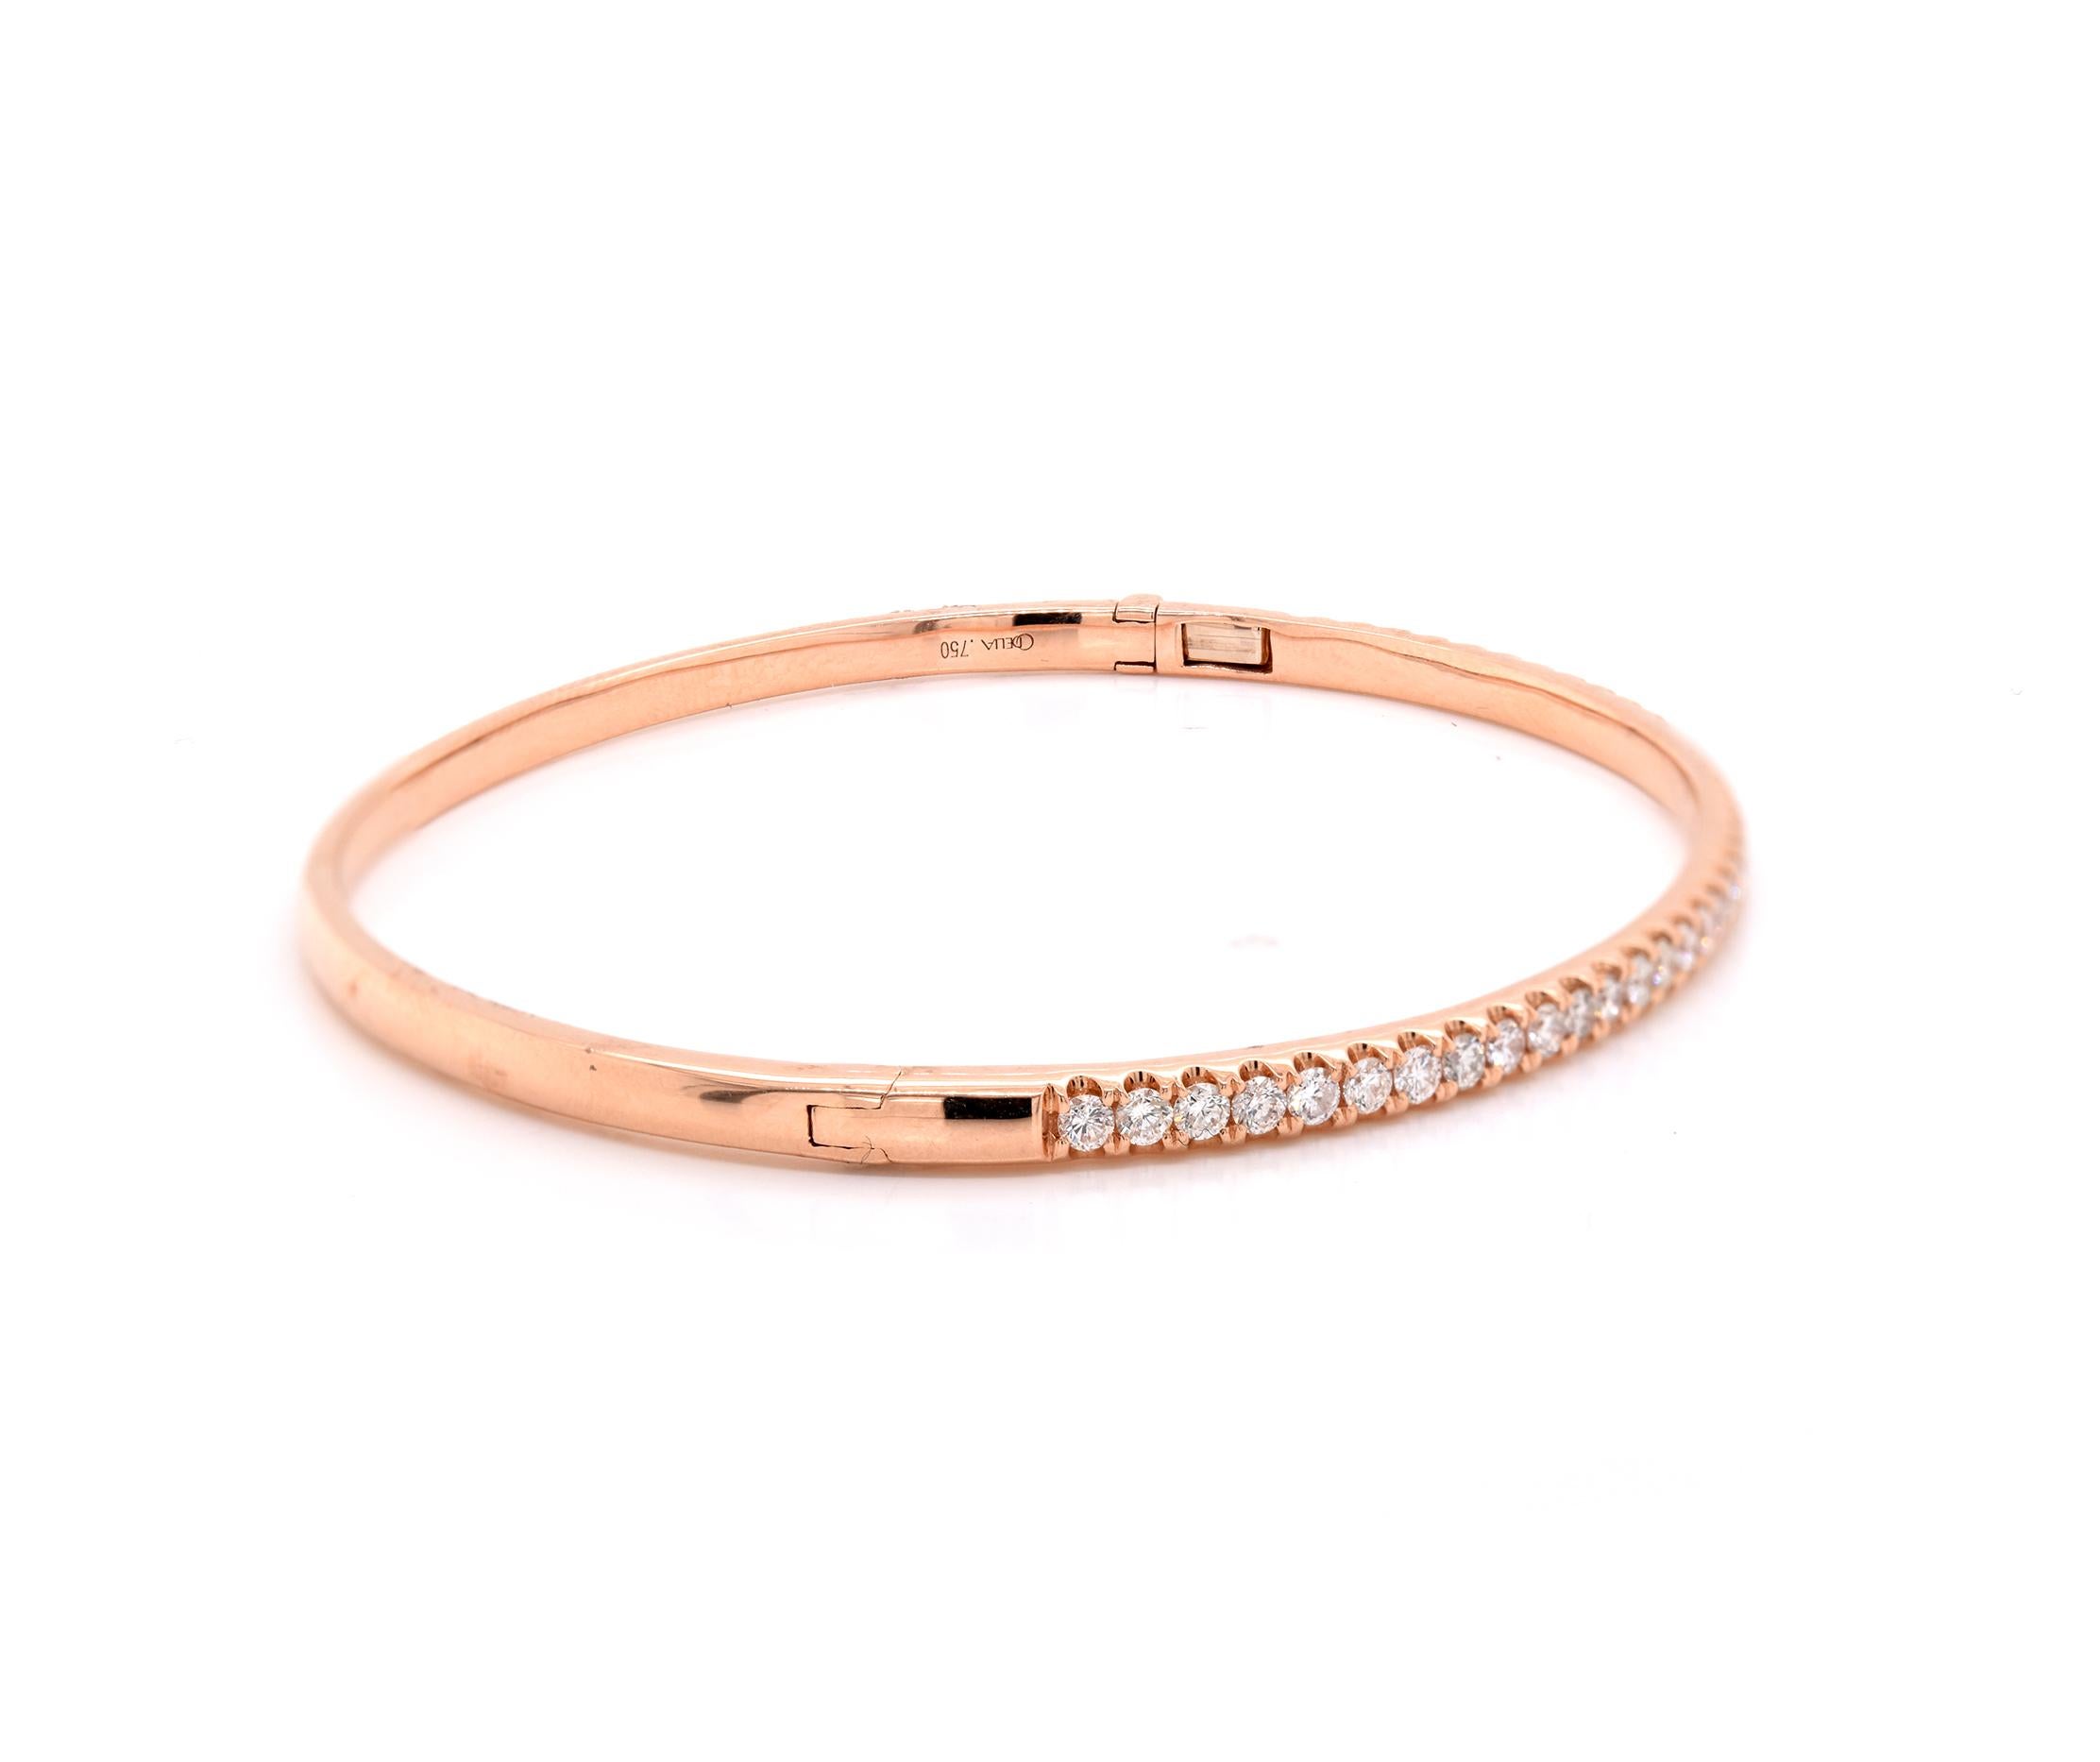 Material: 18K rose gold
Diamonds:  39 round cut = 1.00cttw
Color: G
Clarity: VS
Dimensions: bracelet will fit up to a 6.5-inch wrist 
Weight: 11.46 grams